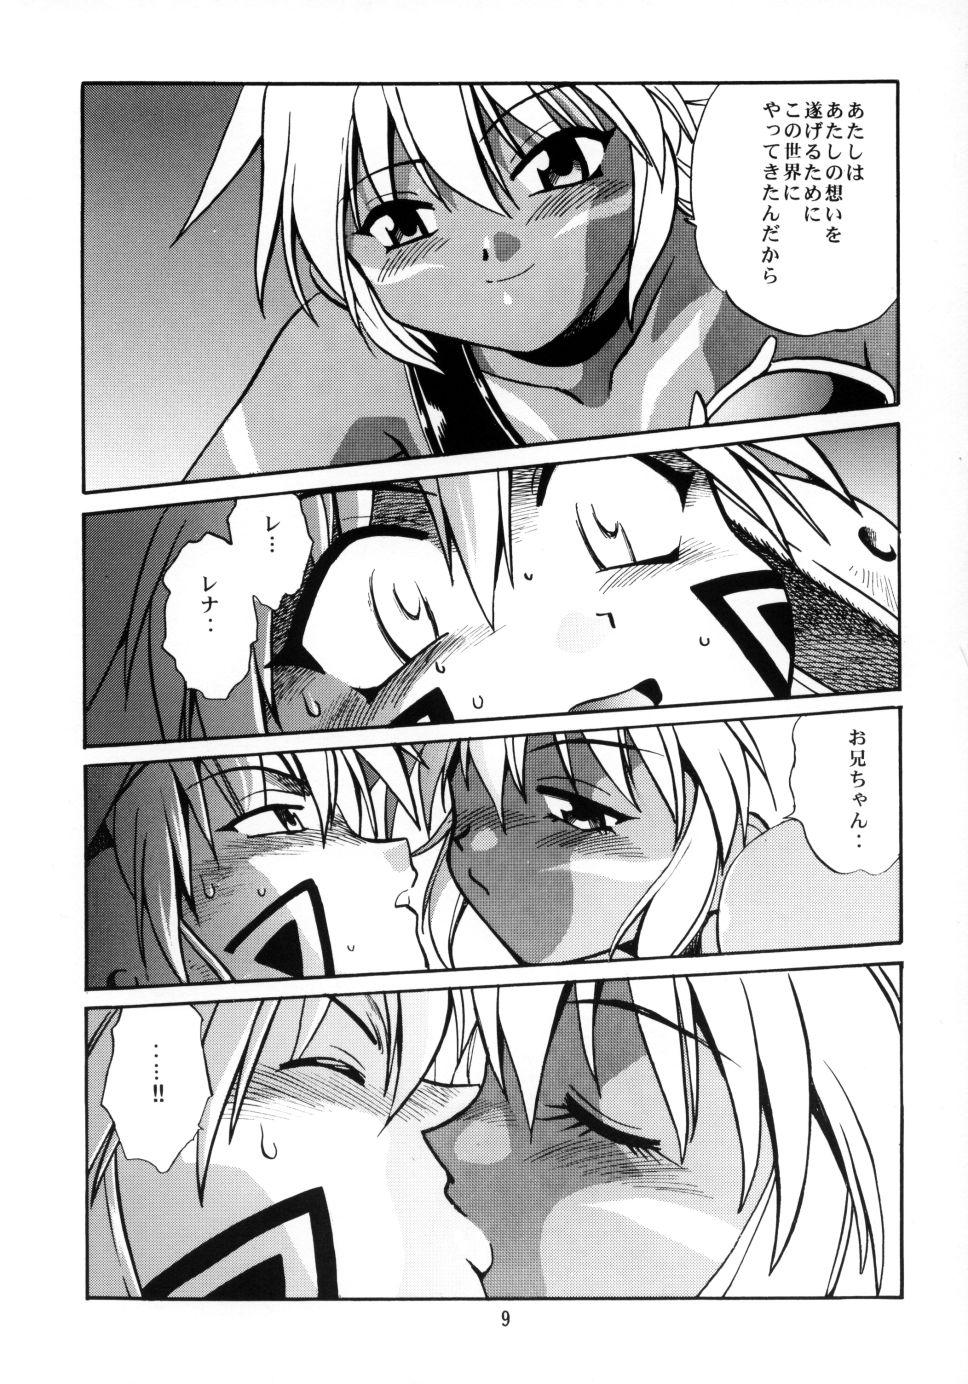 Tribute .hack//extra - .hacklegend of the twilight Shemale - Page 8